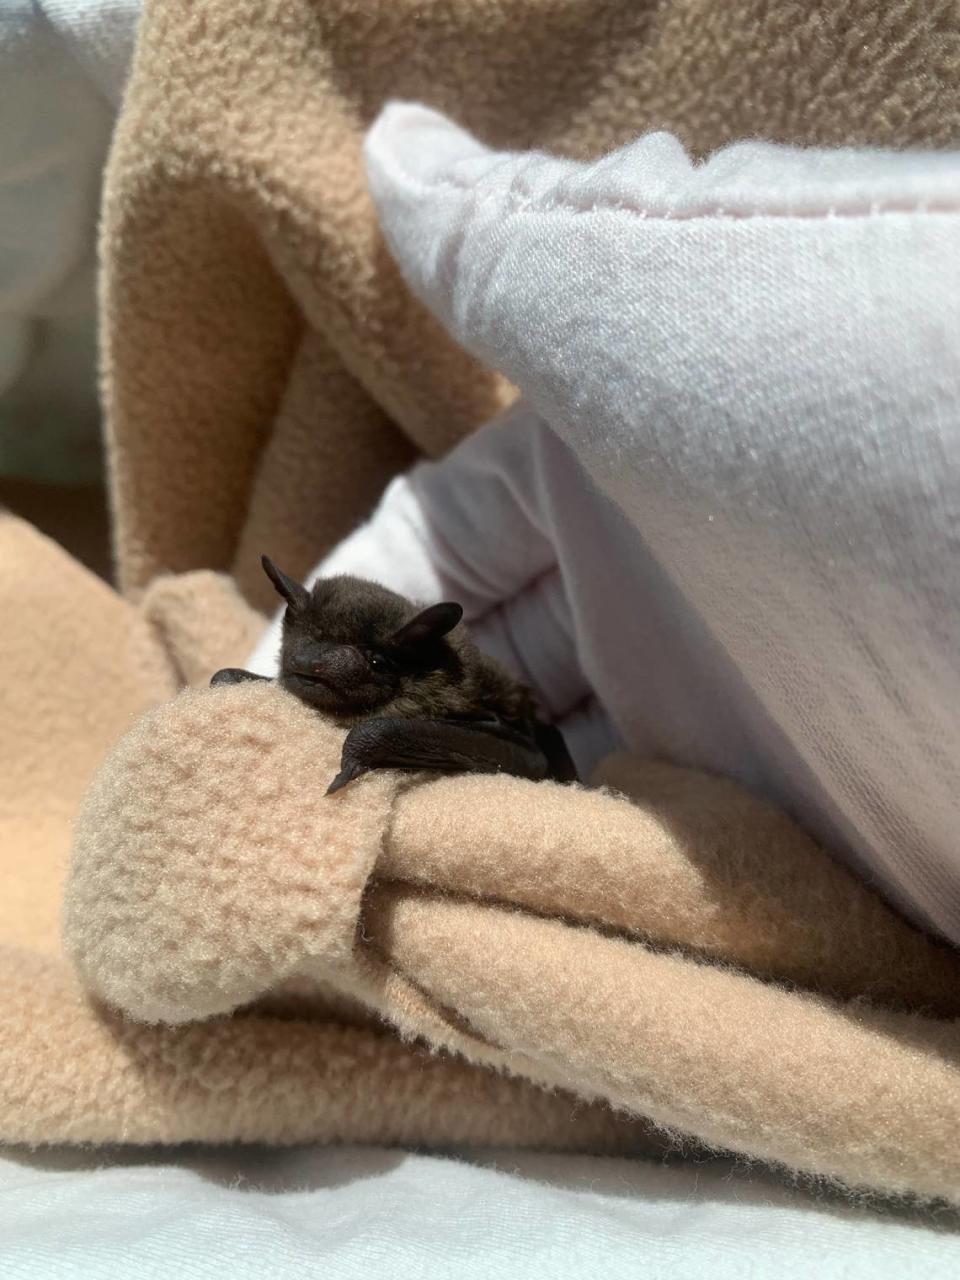 A specialist comforts a rescued evening bat.